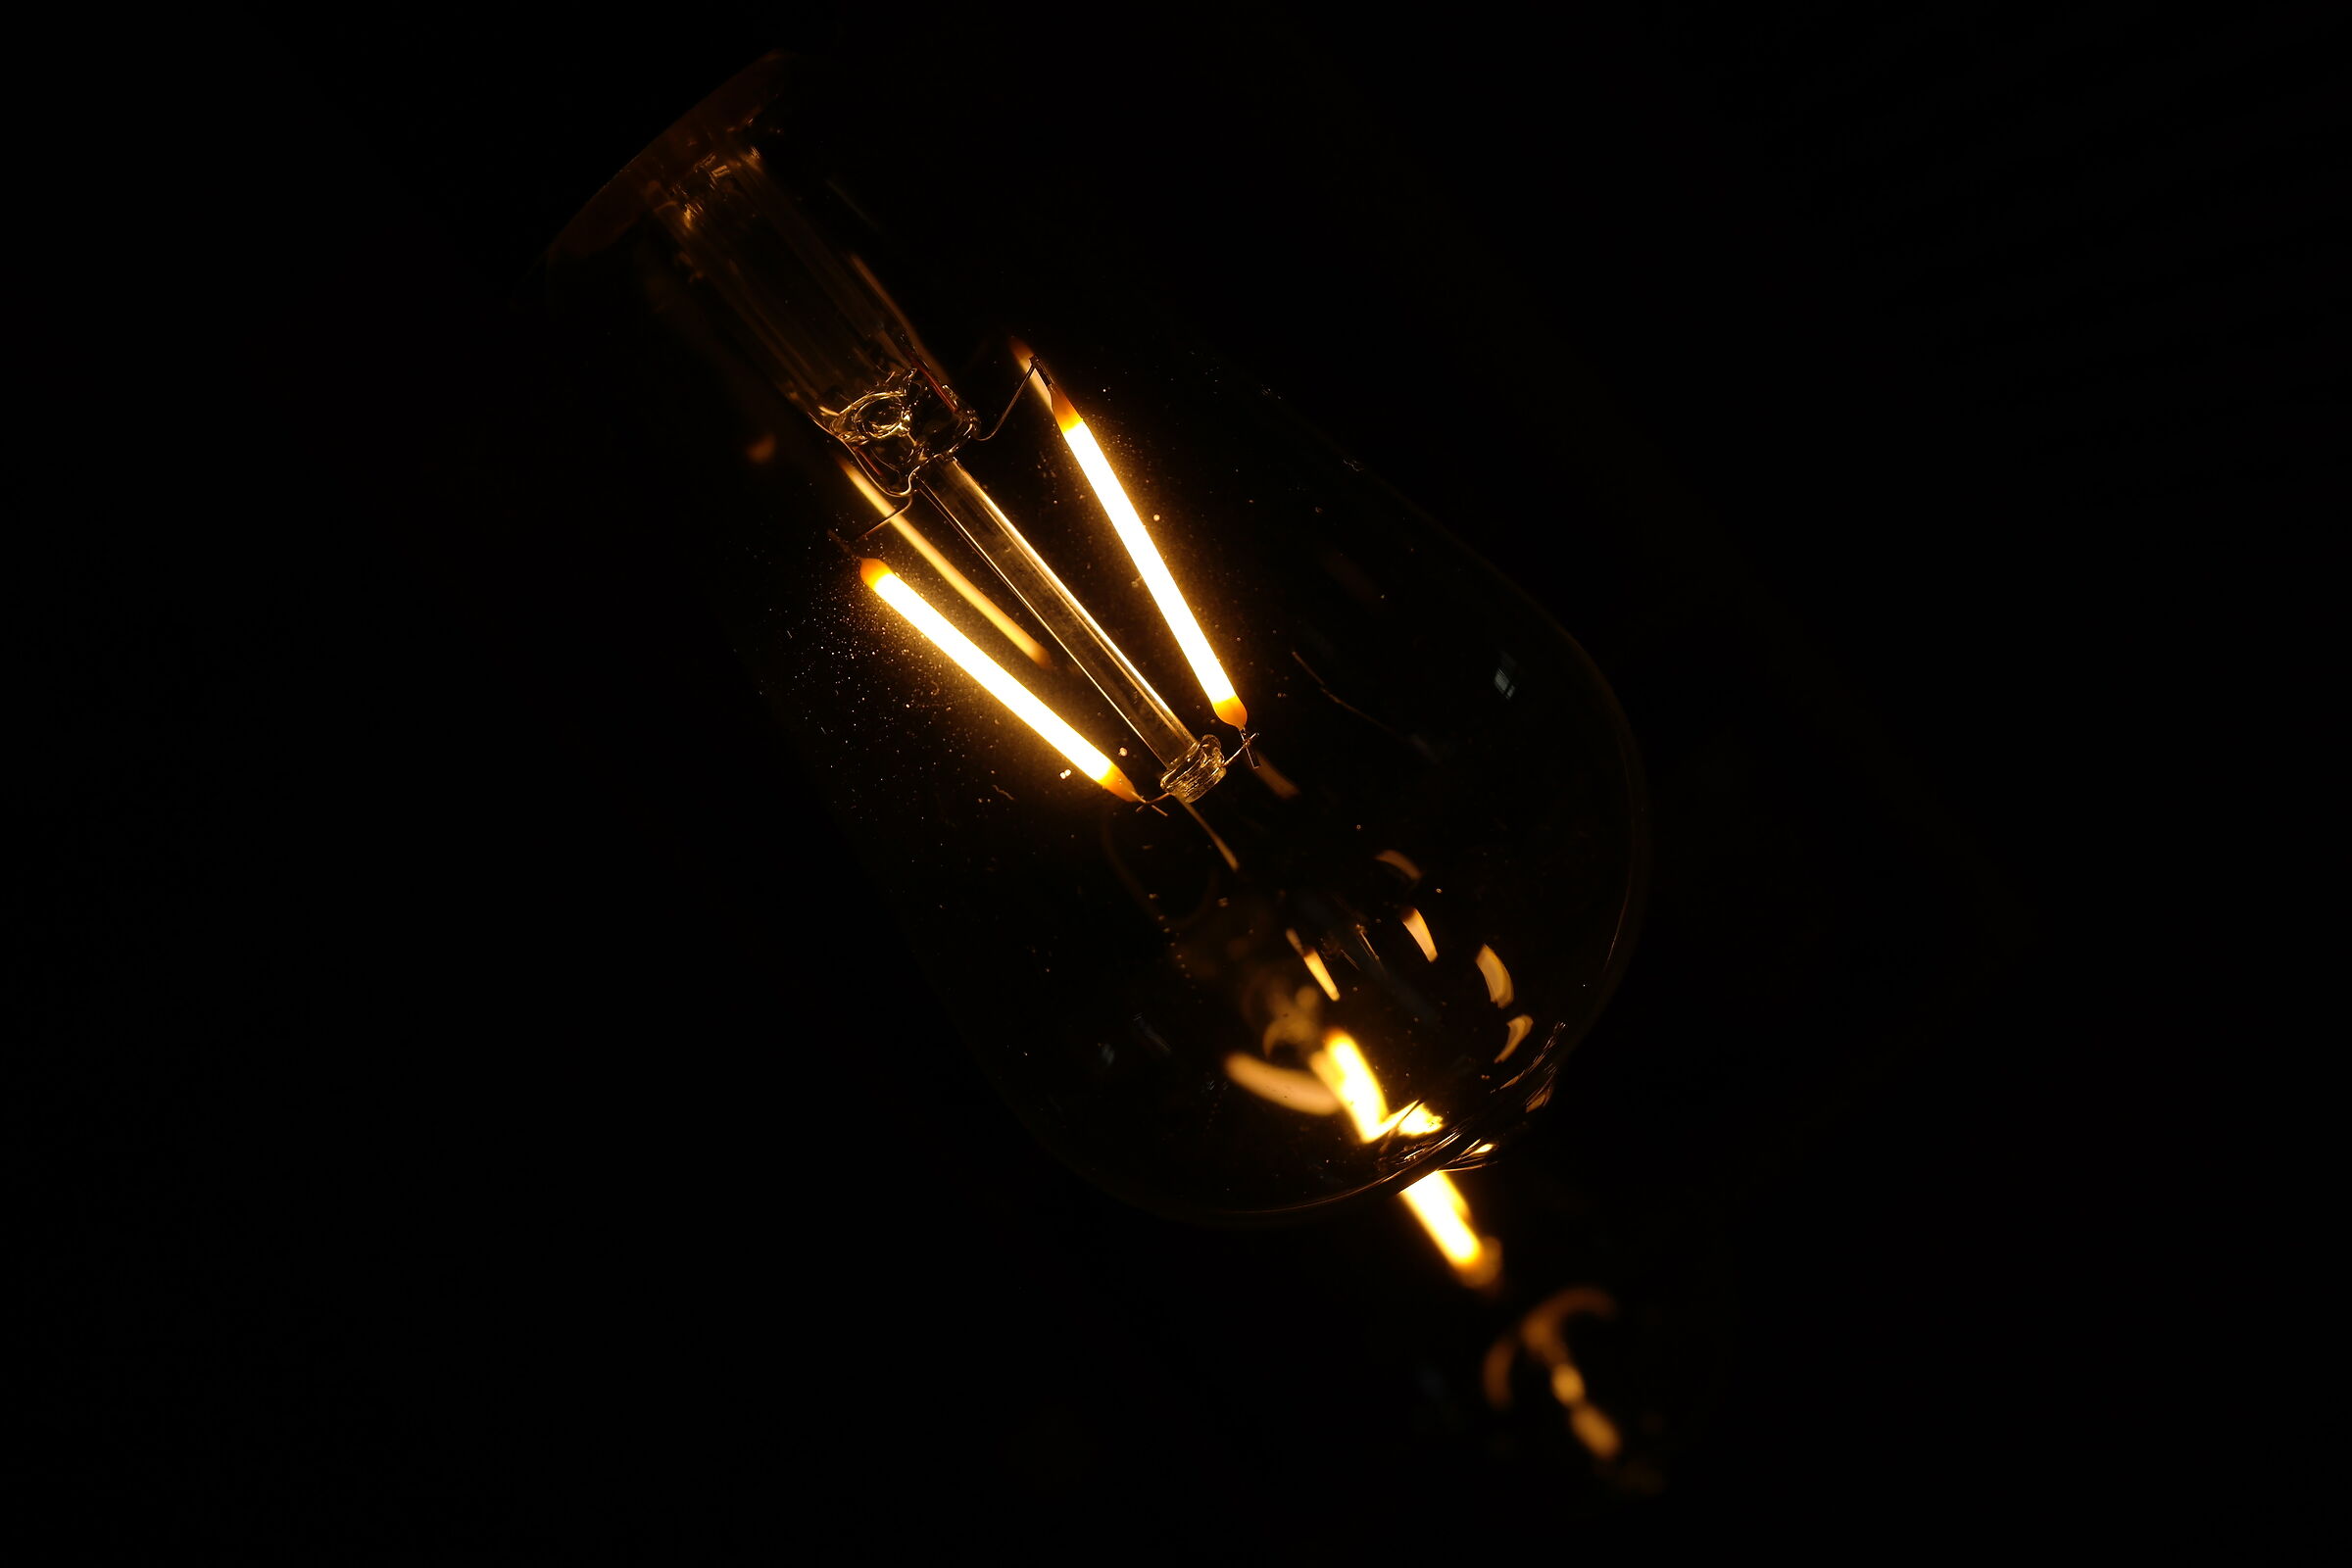 Experiments in the dark...